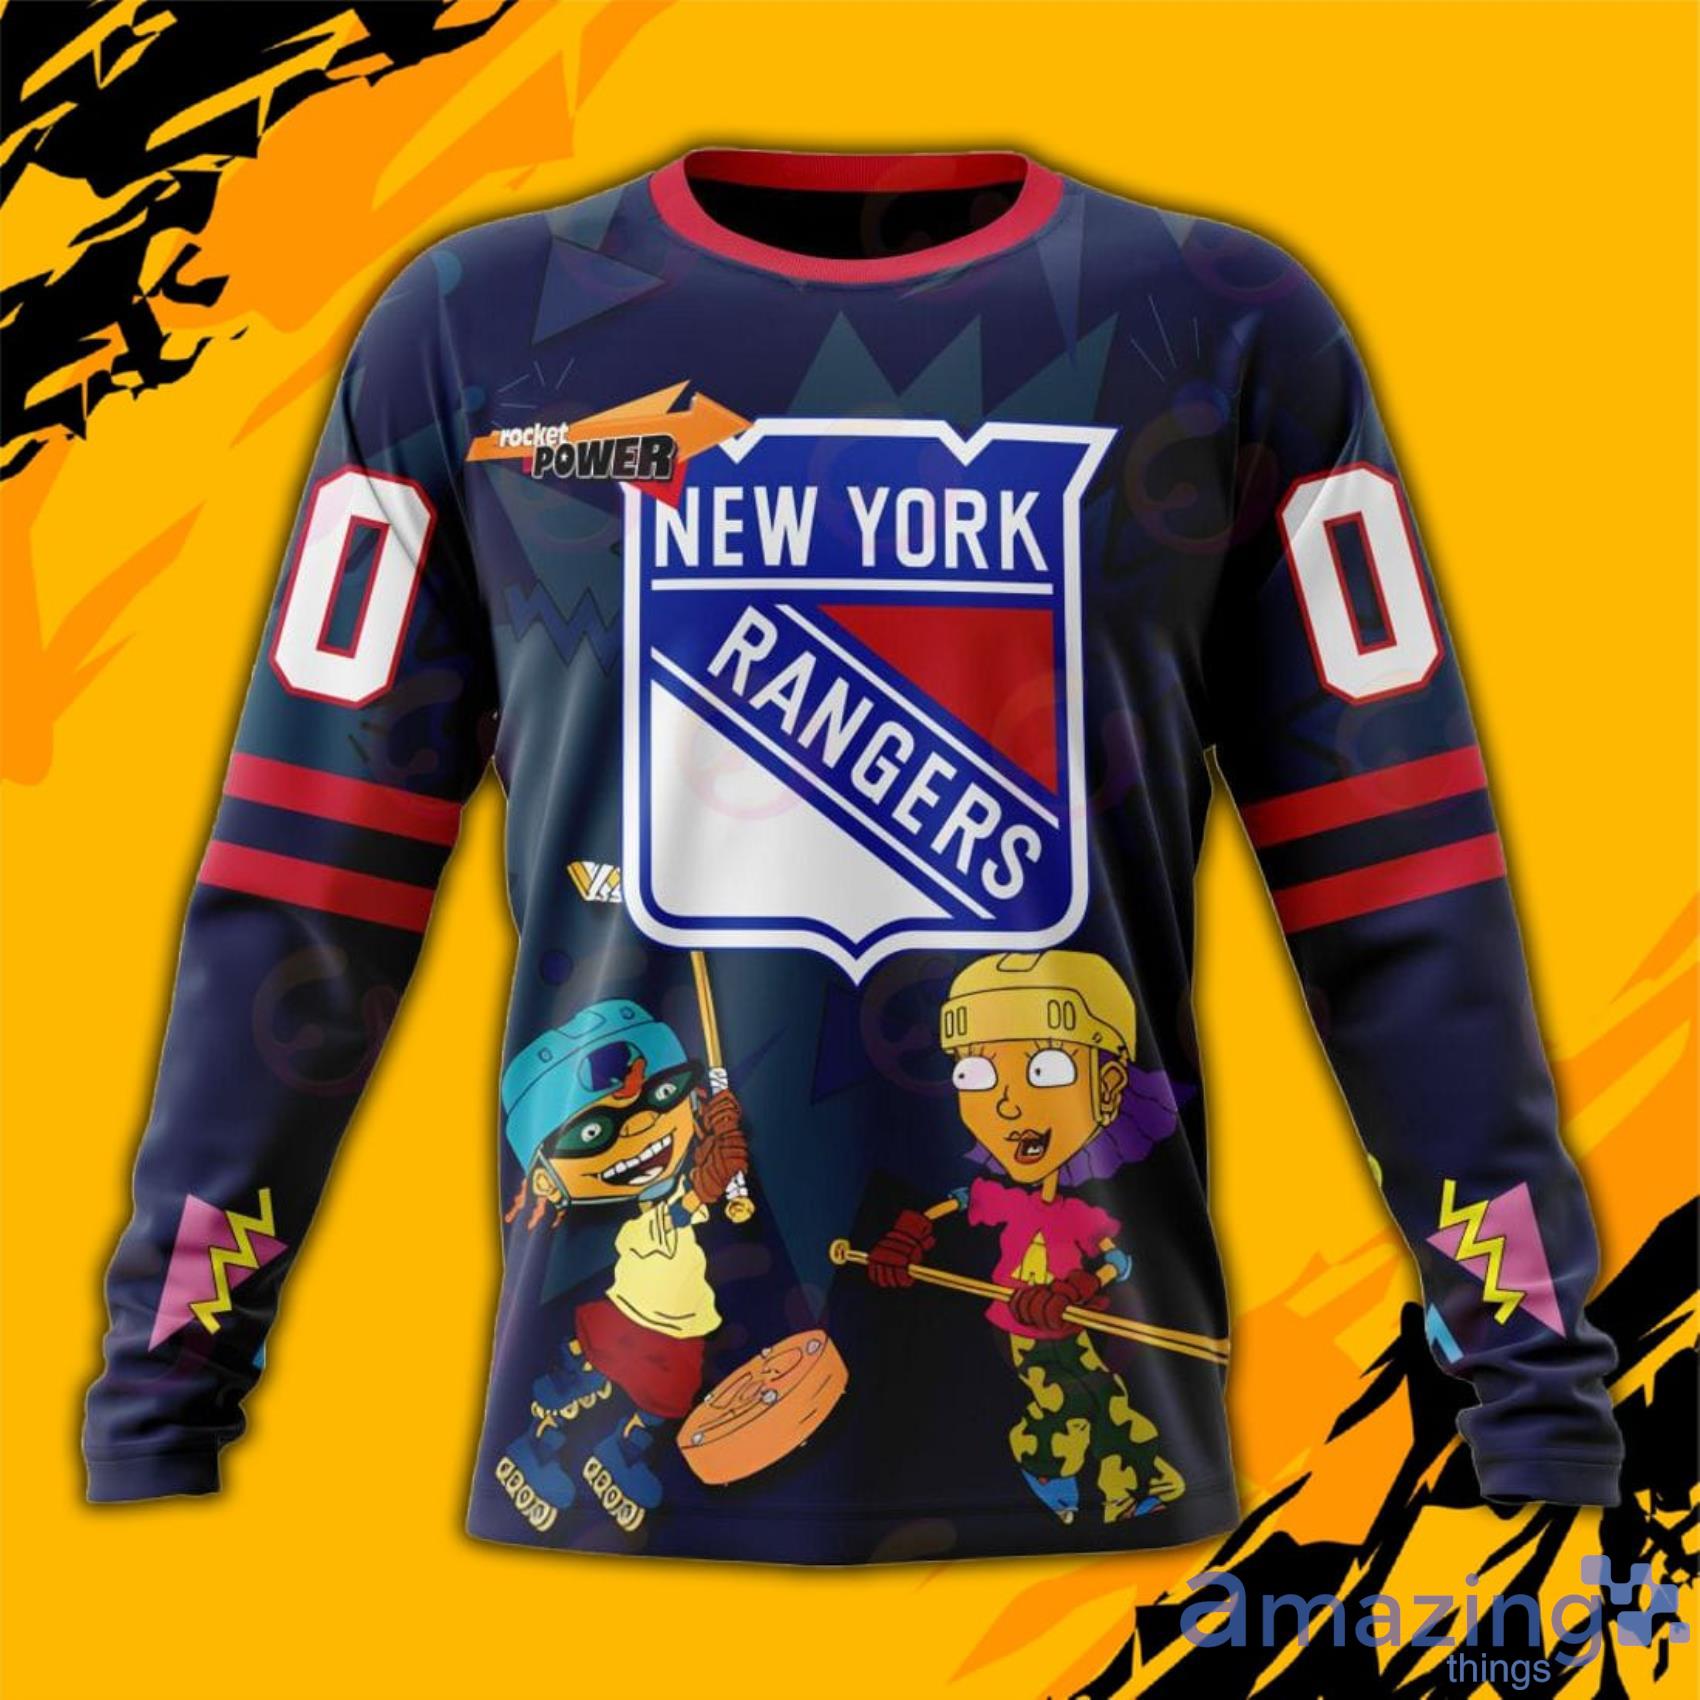 NY Rangers Personalized Apparel